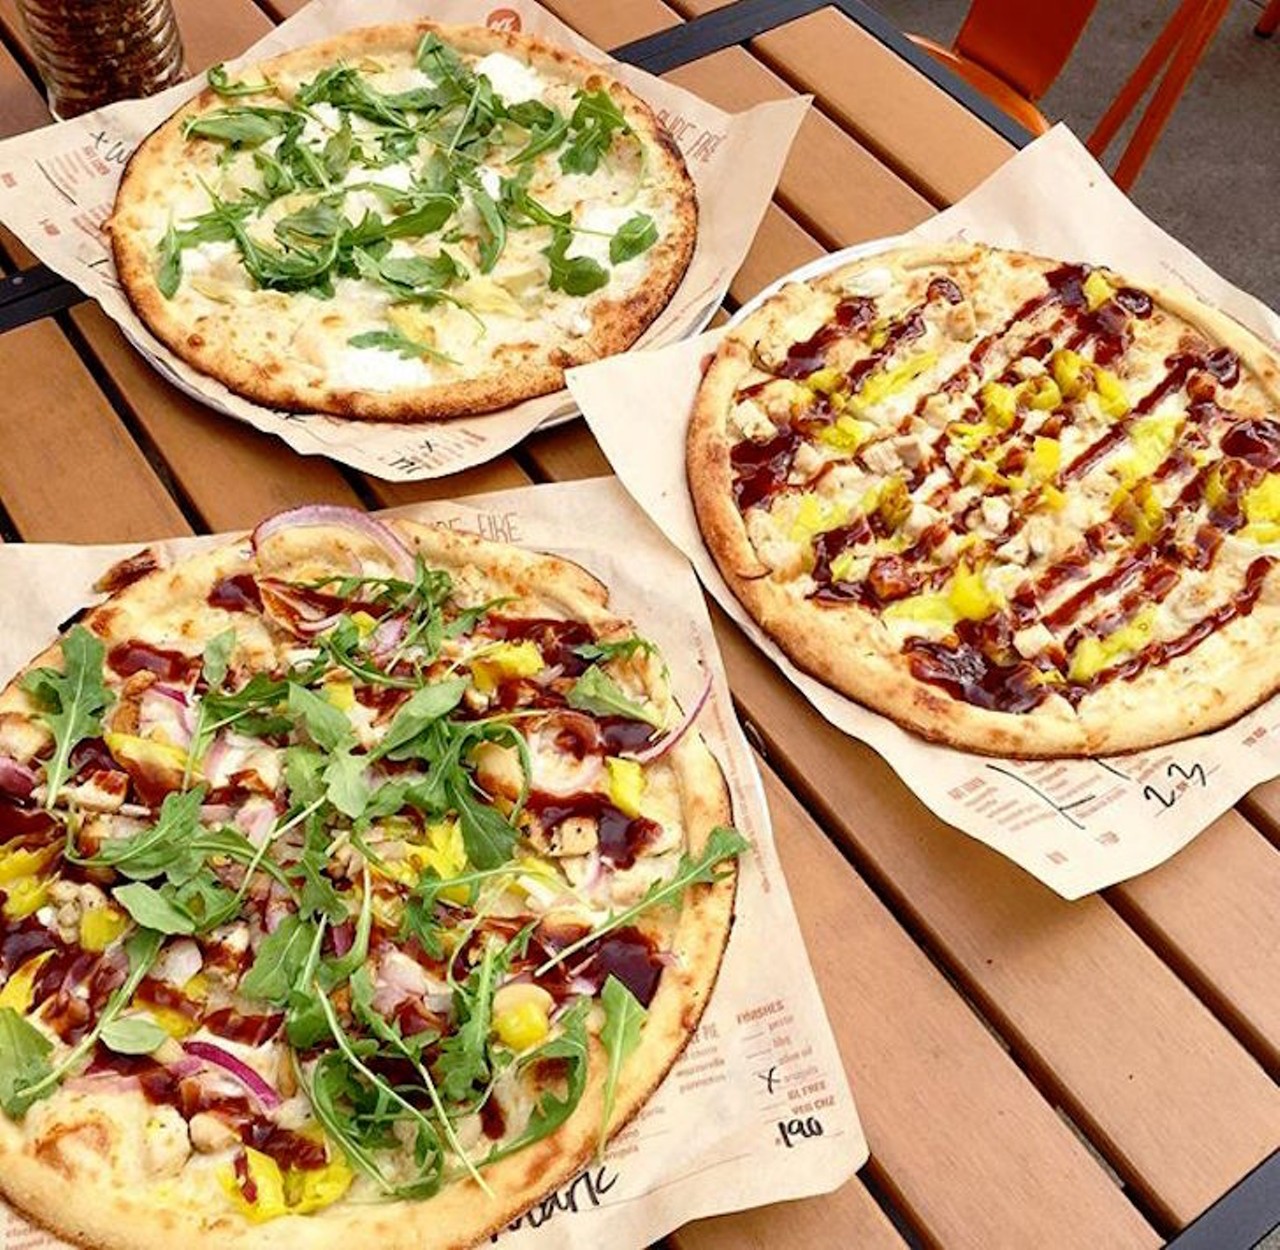 Blaze Pizza
4100 N. Alafaya Trail
Set up like a Chipotle or Subway, Blaze Pizza allows its customers to build their own pizza for $7.95. And for no extra charge, guests can choose any toppings -- how cool is that?
Photo via itsmebizzmarkie/Instagram